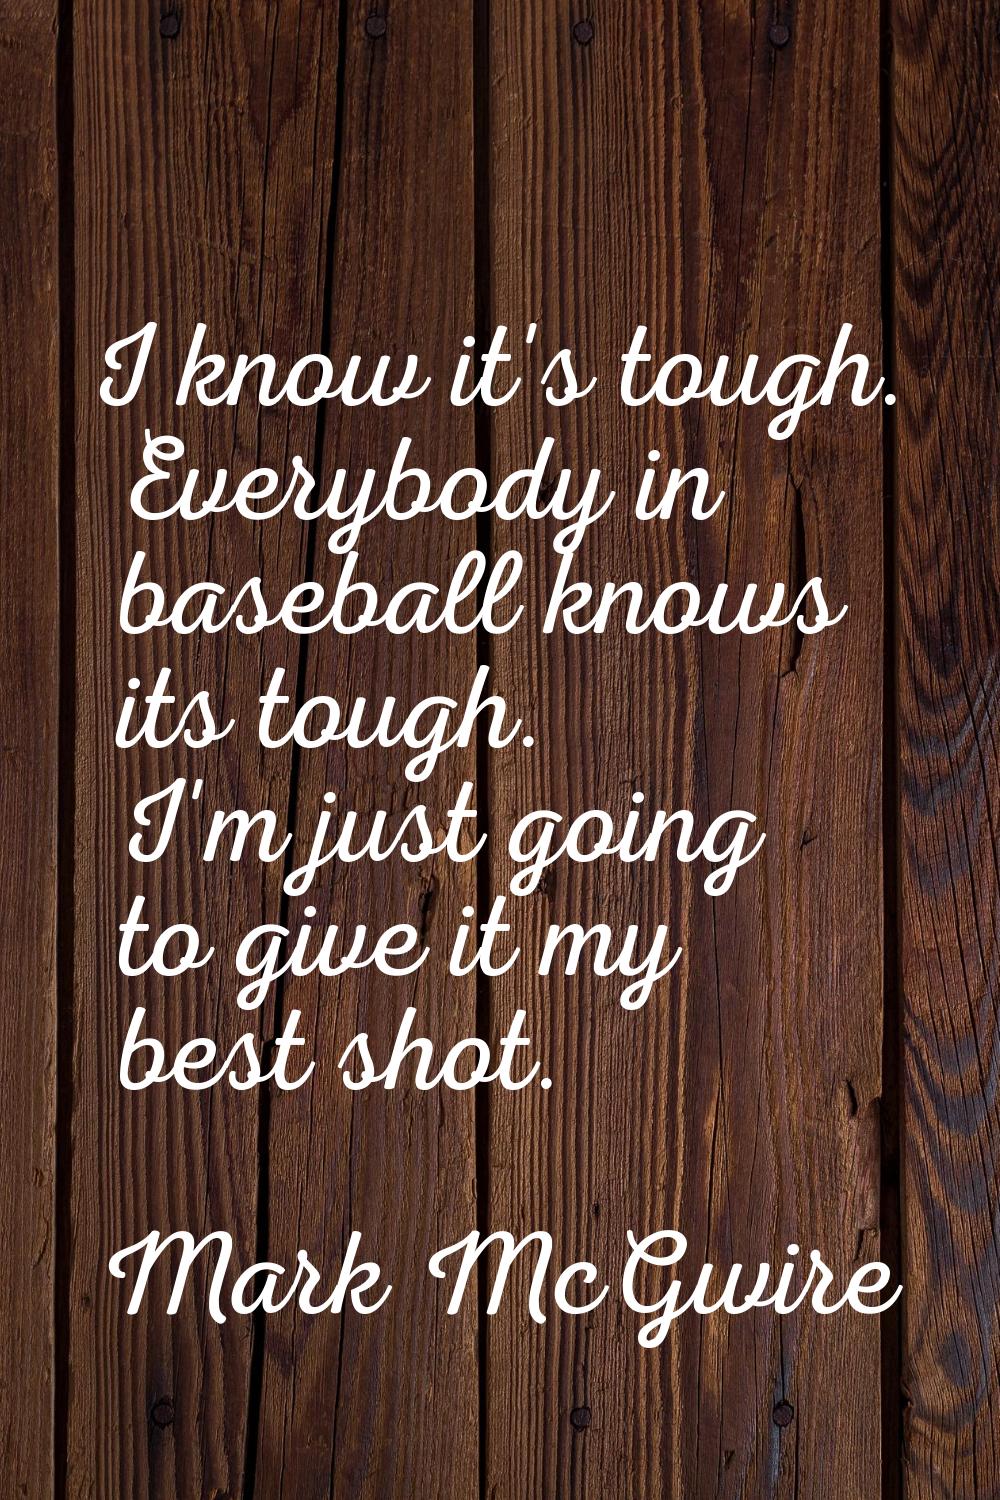 I know it's tough. Everybody in baseball knows its tough. I'm just going to give it my best shot.